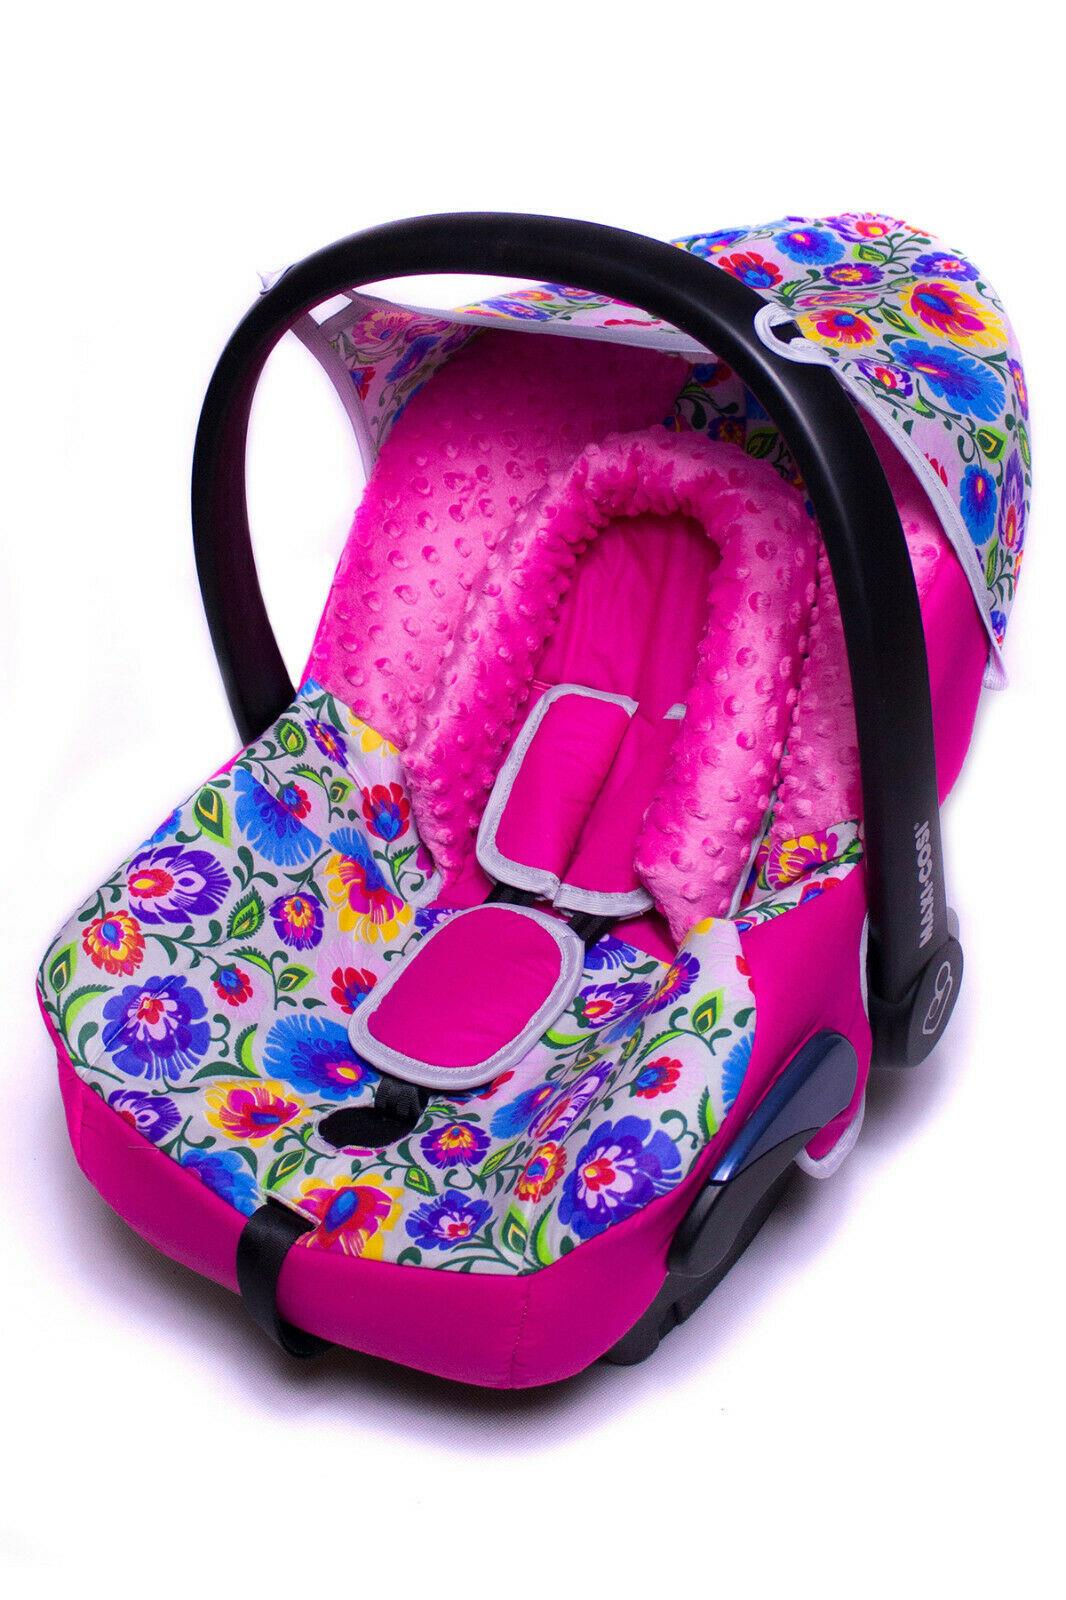 Full Cover Set Fitting Maxi Cosi Cabriofix Baby Car Seat - Flowers / Pink